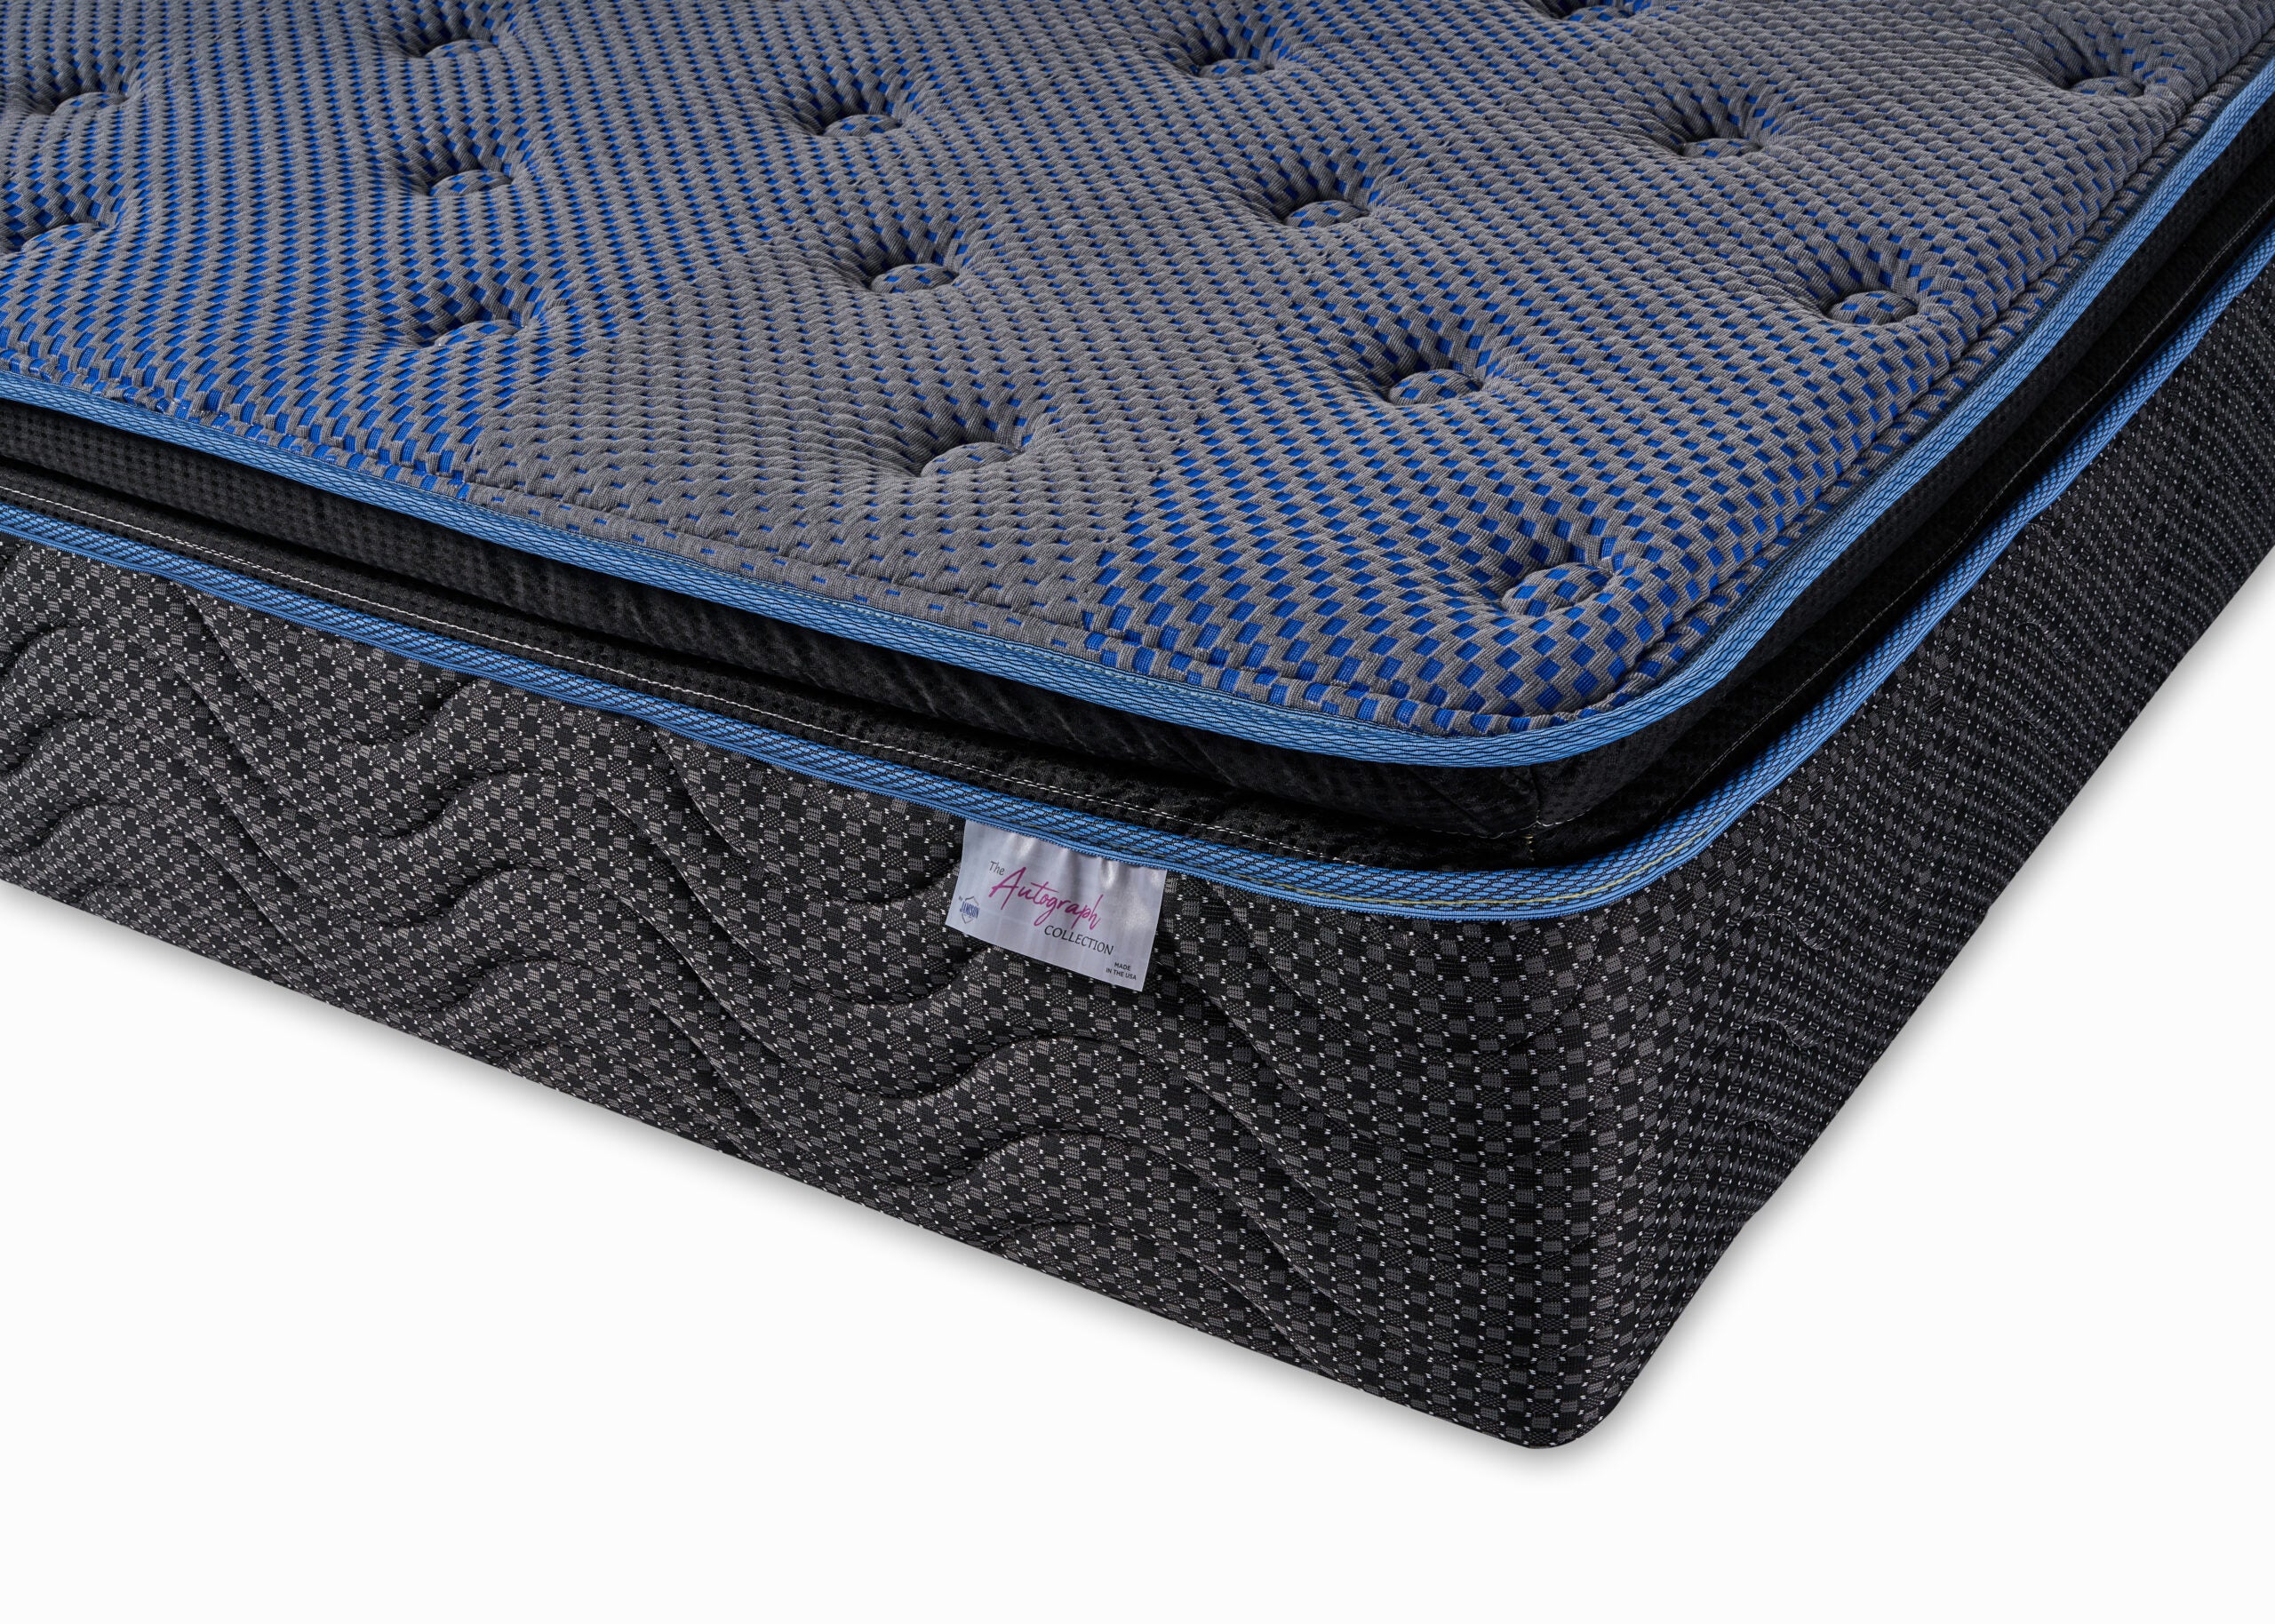 Pinellas Park Pillow-Top 14in Mattress by Jamison